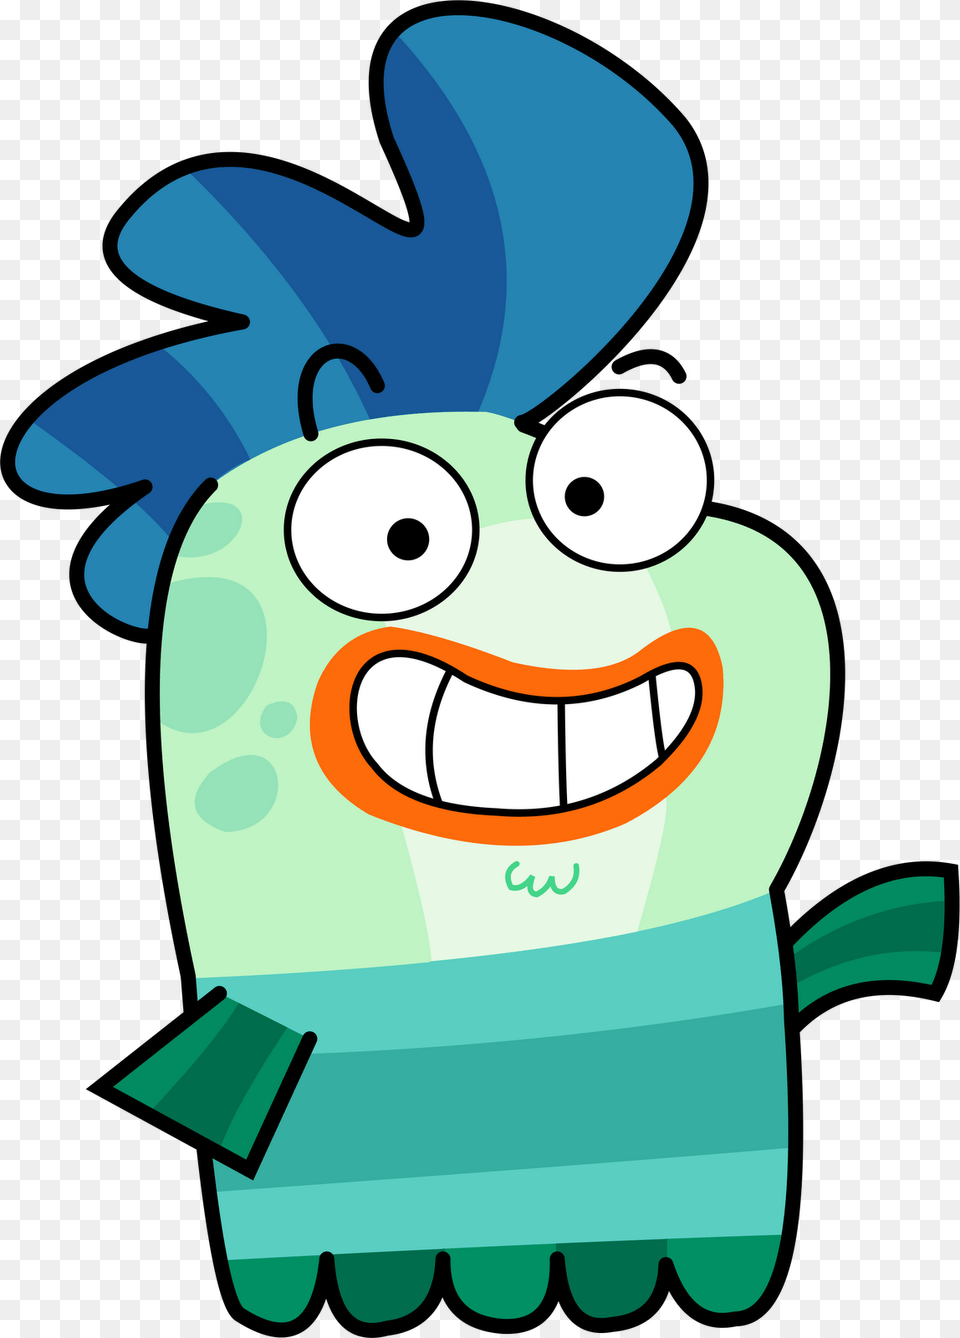 Characters Form Fish Hooks And Milo Are Owned By Disney Fish Hooks Disney Channel, Plush, Toy, Cartoon, Nature Free Png